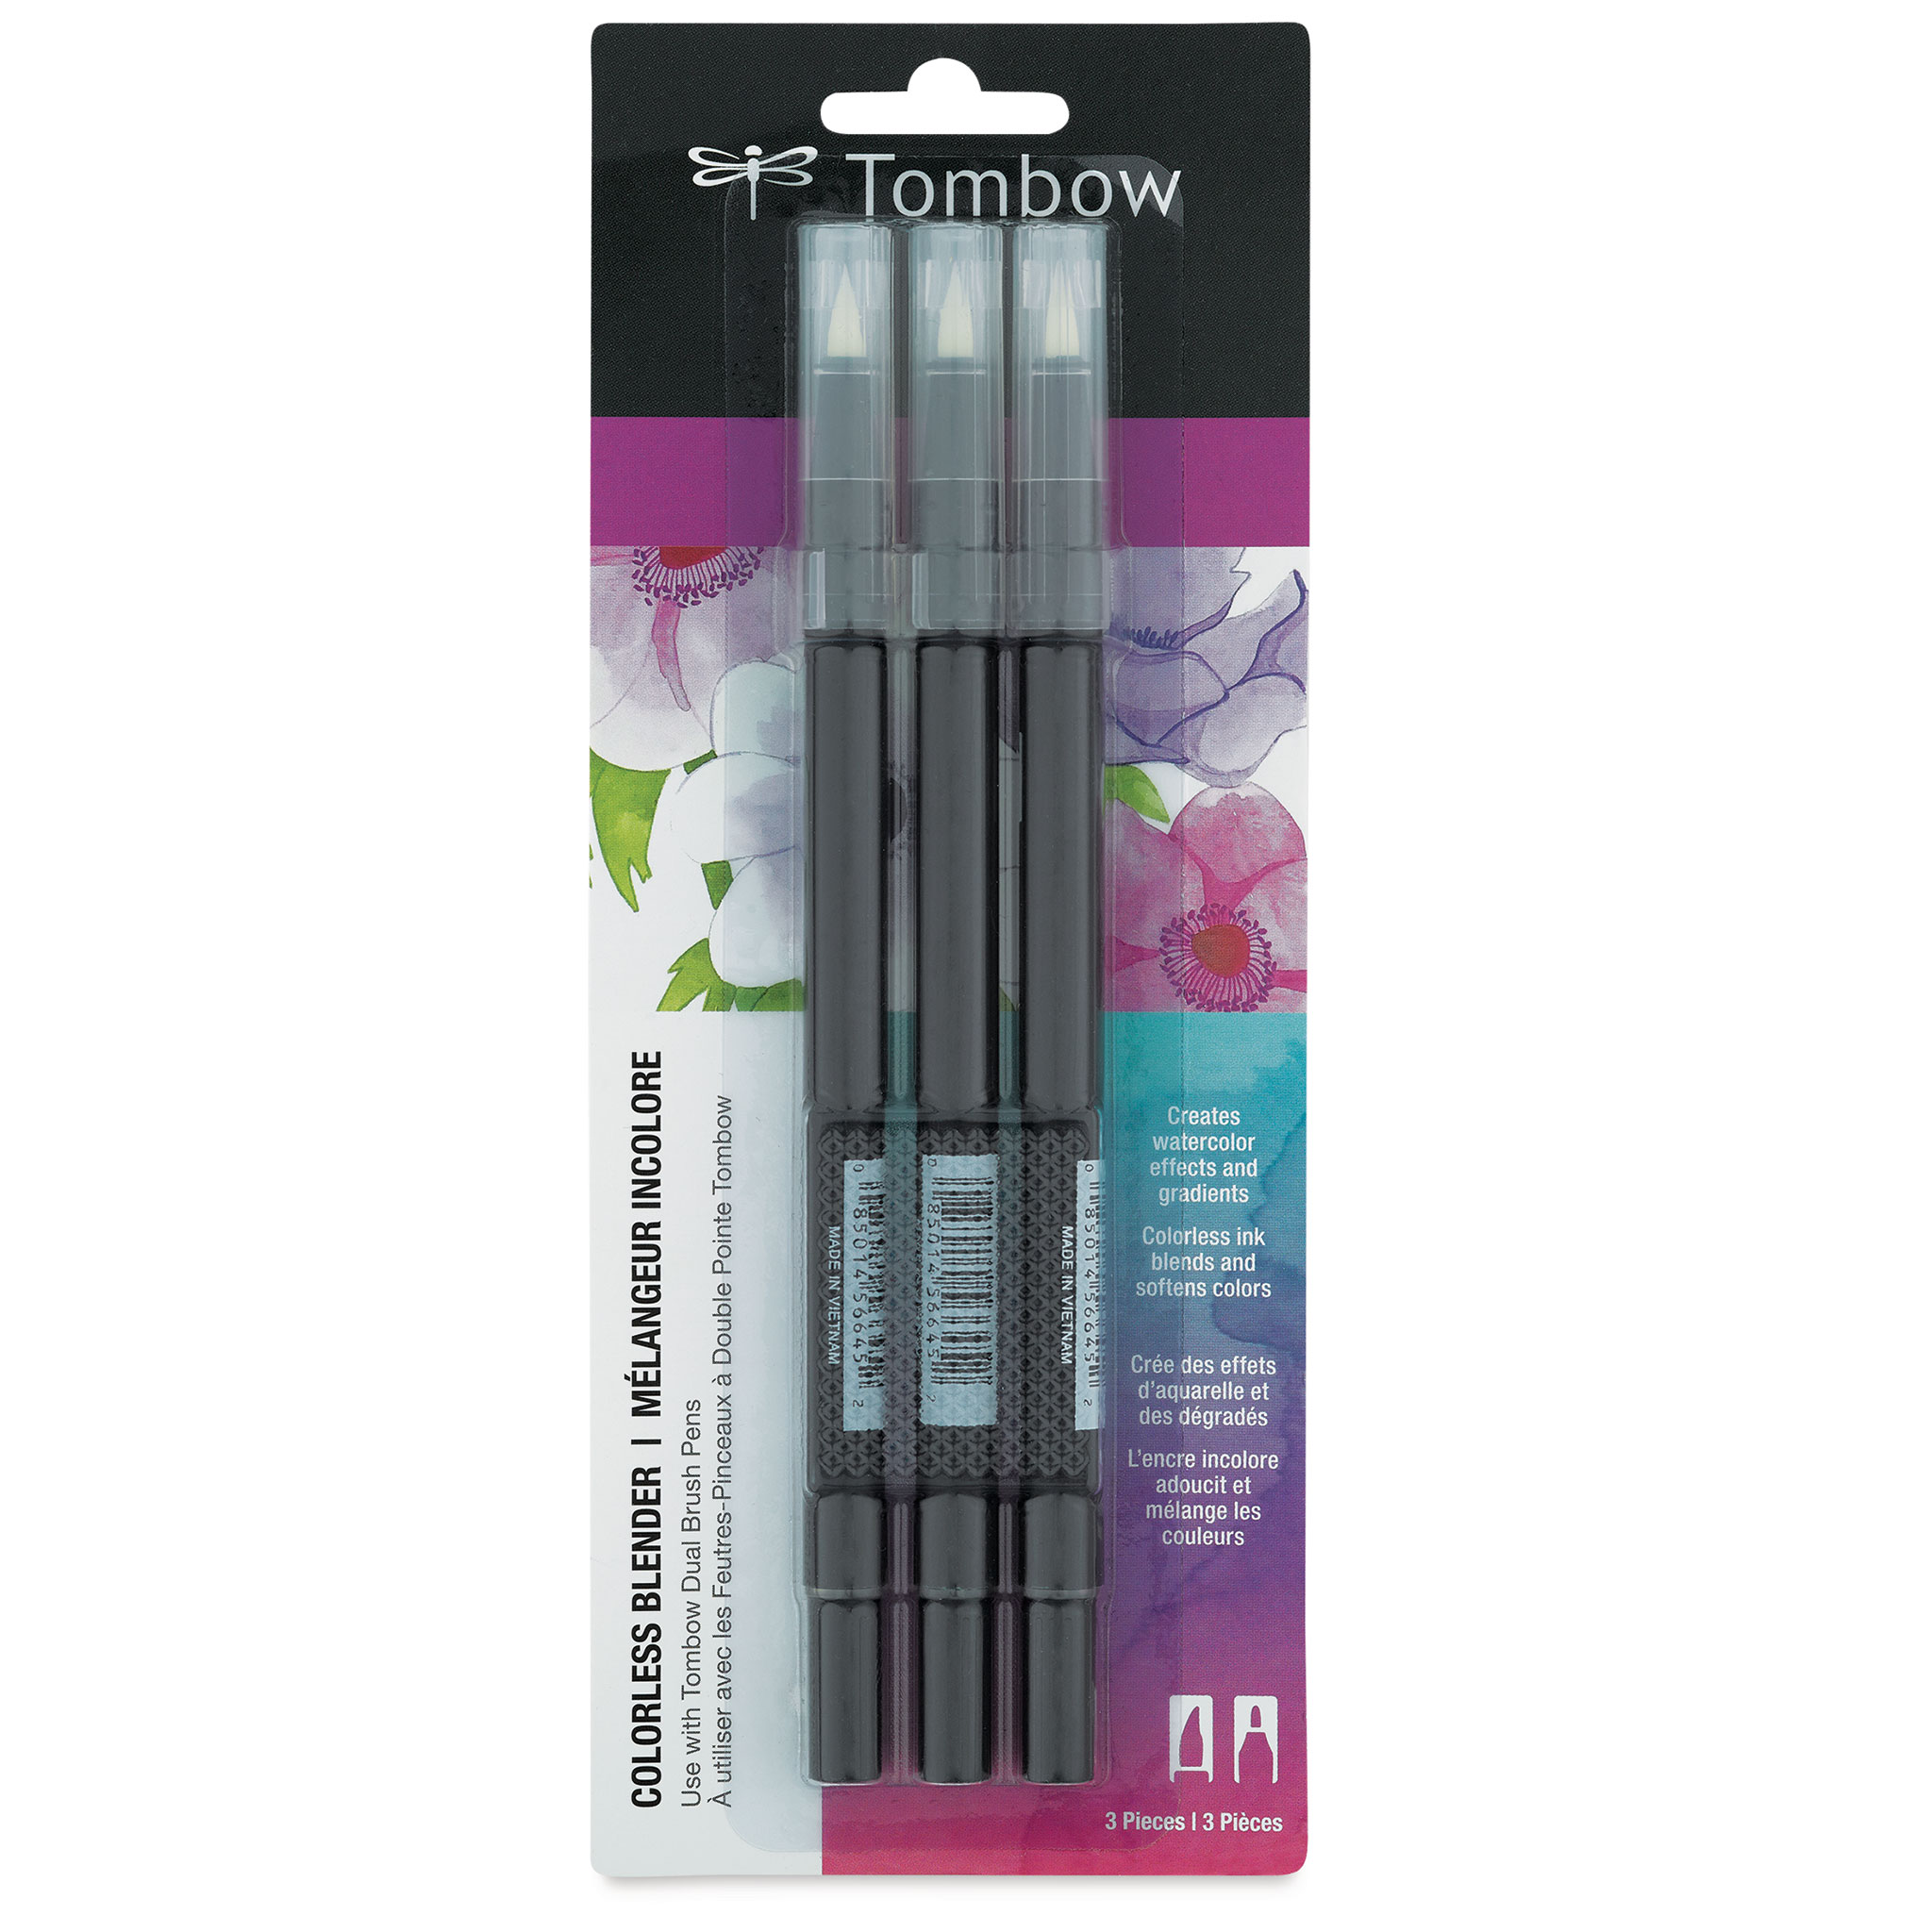 Tombow Dual Brush Pens - Secondary Colors, Set of 10